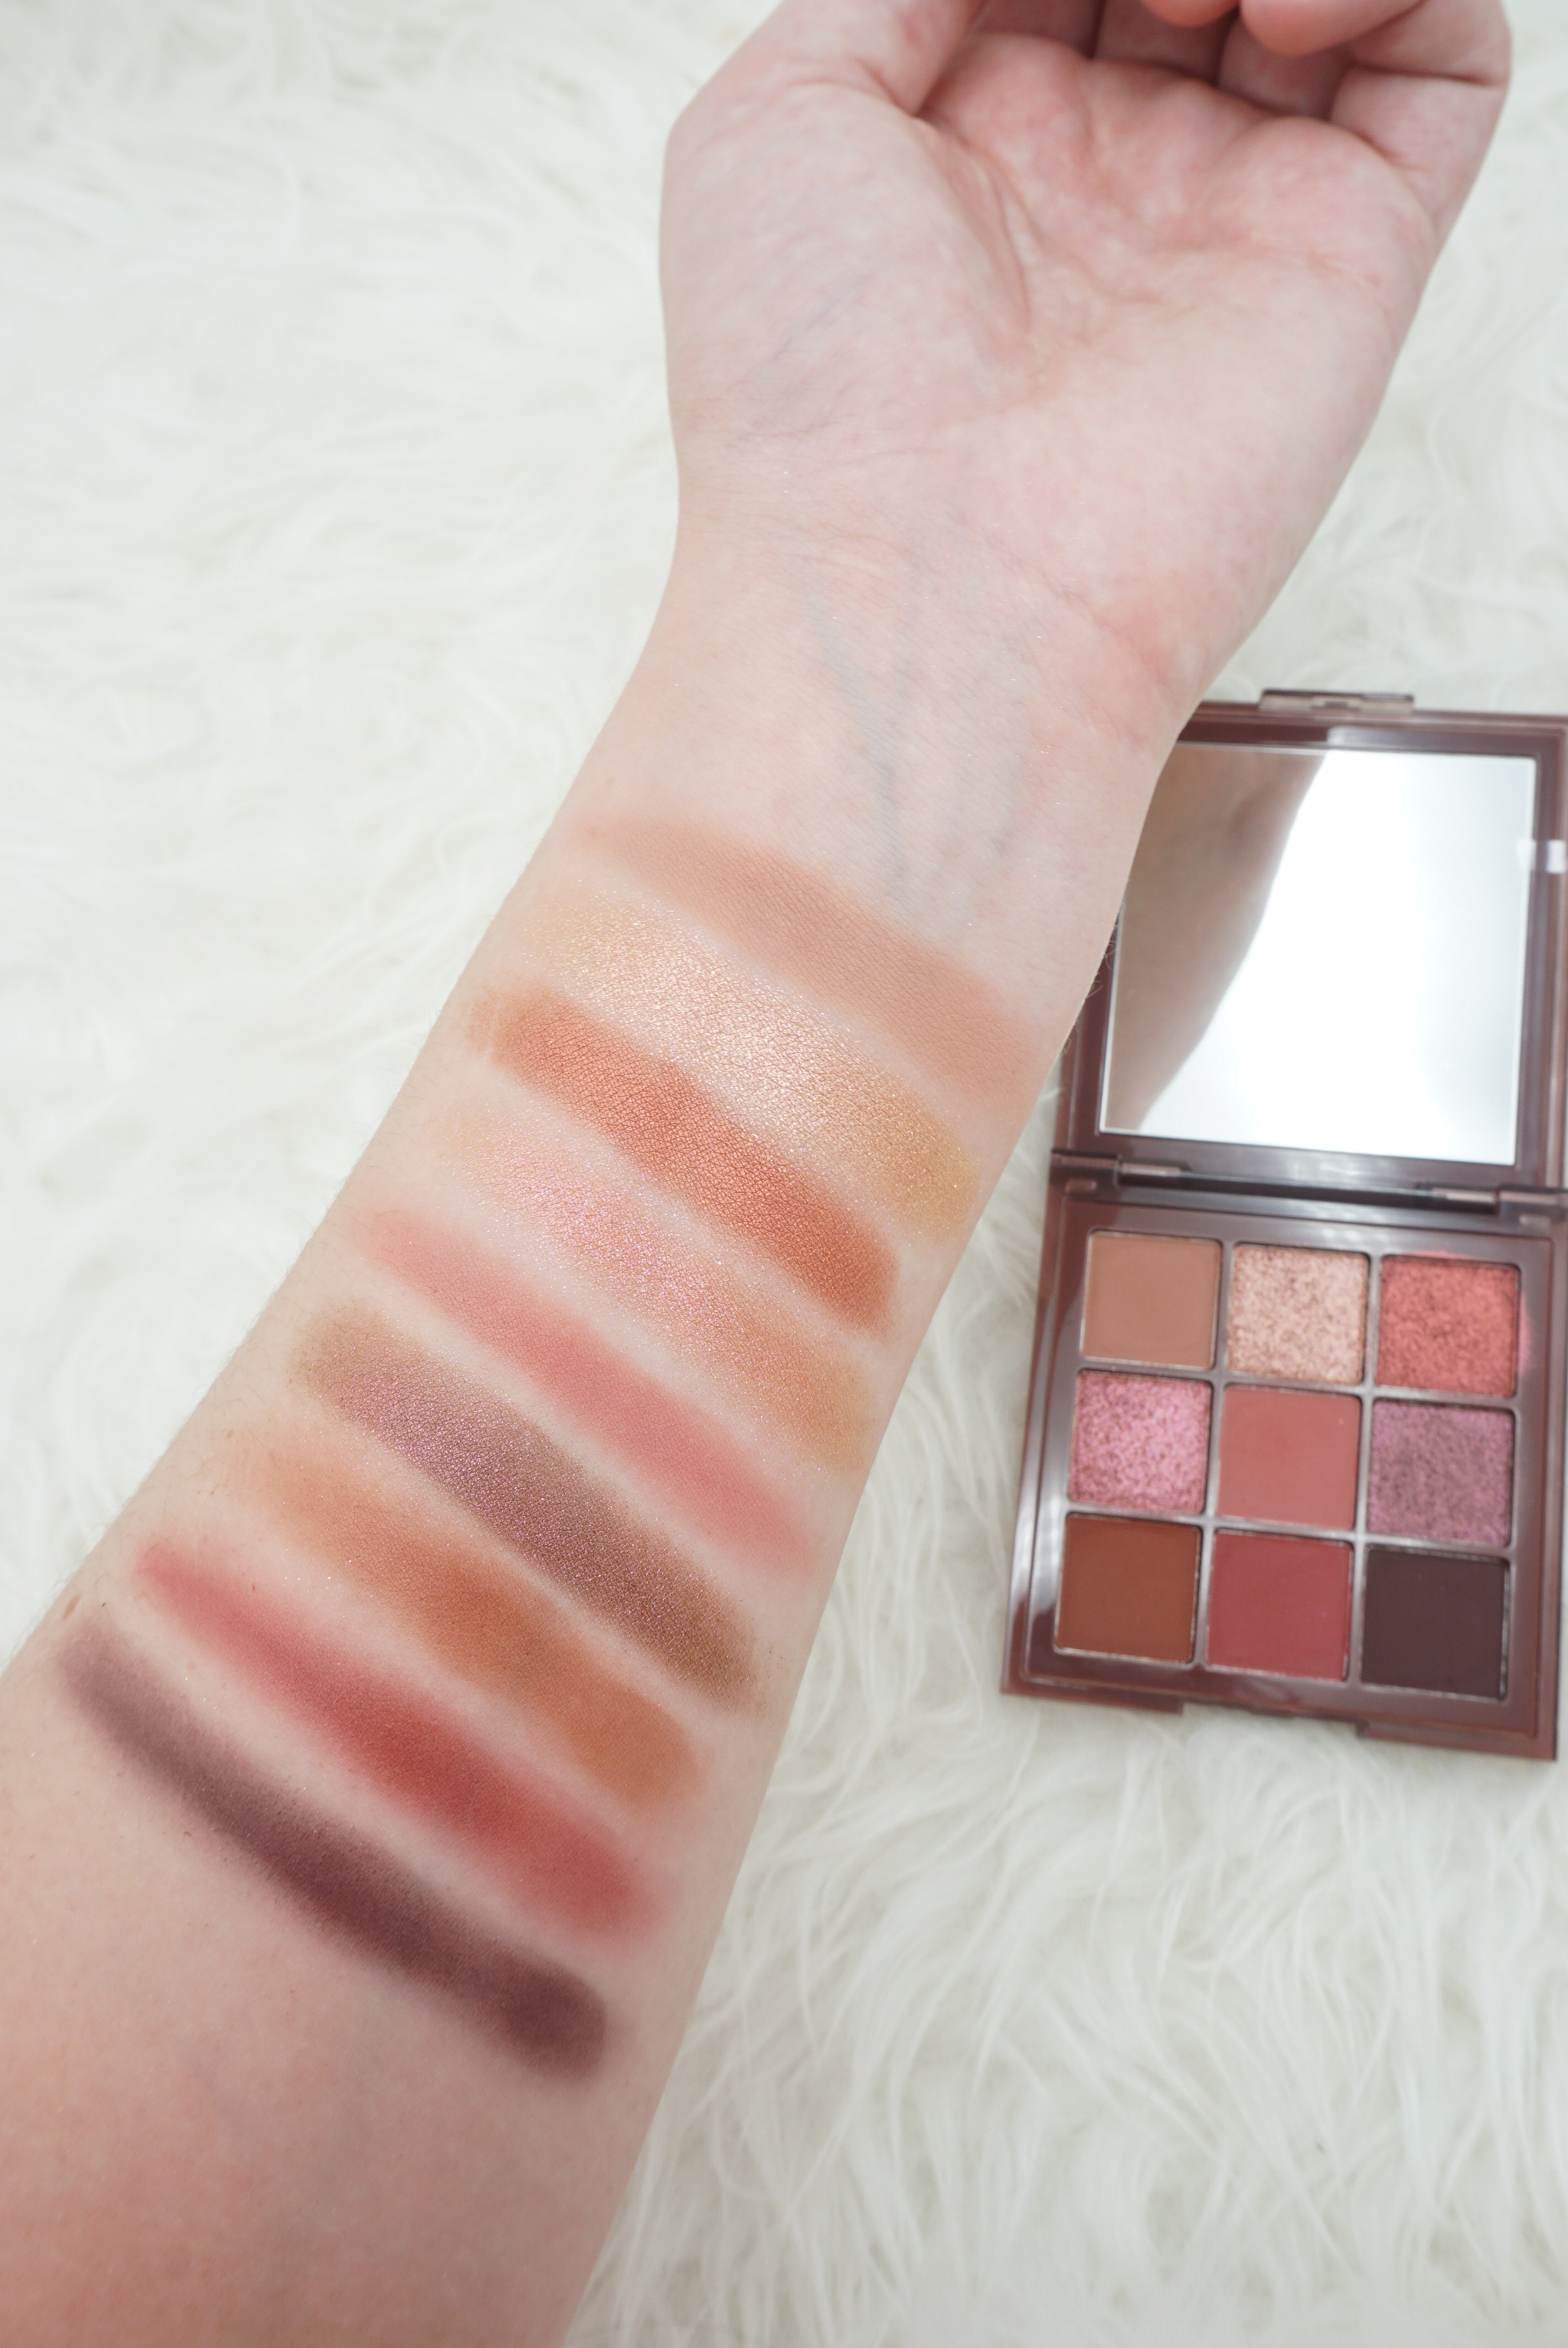 Huda Beauty Nude Obsessions Palettes | All 3 palettes Review & Swatches